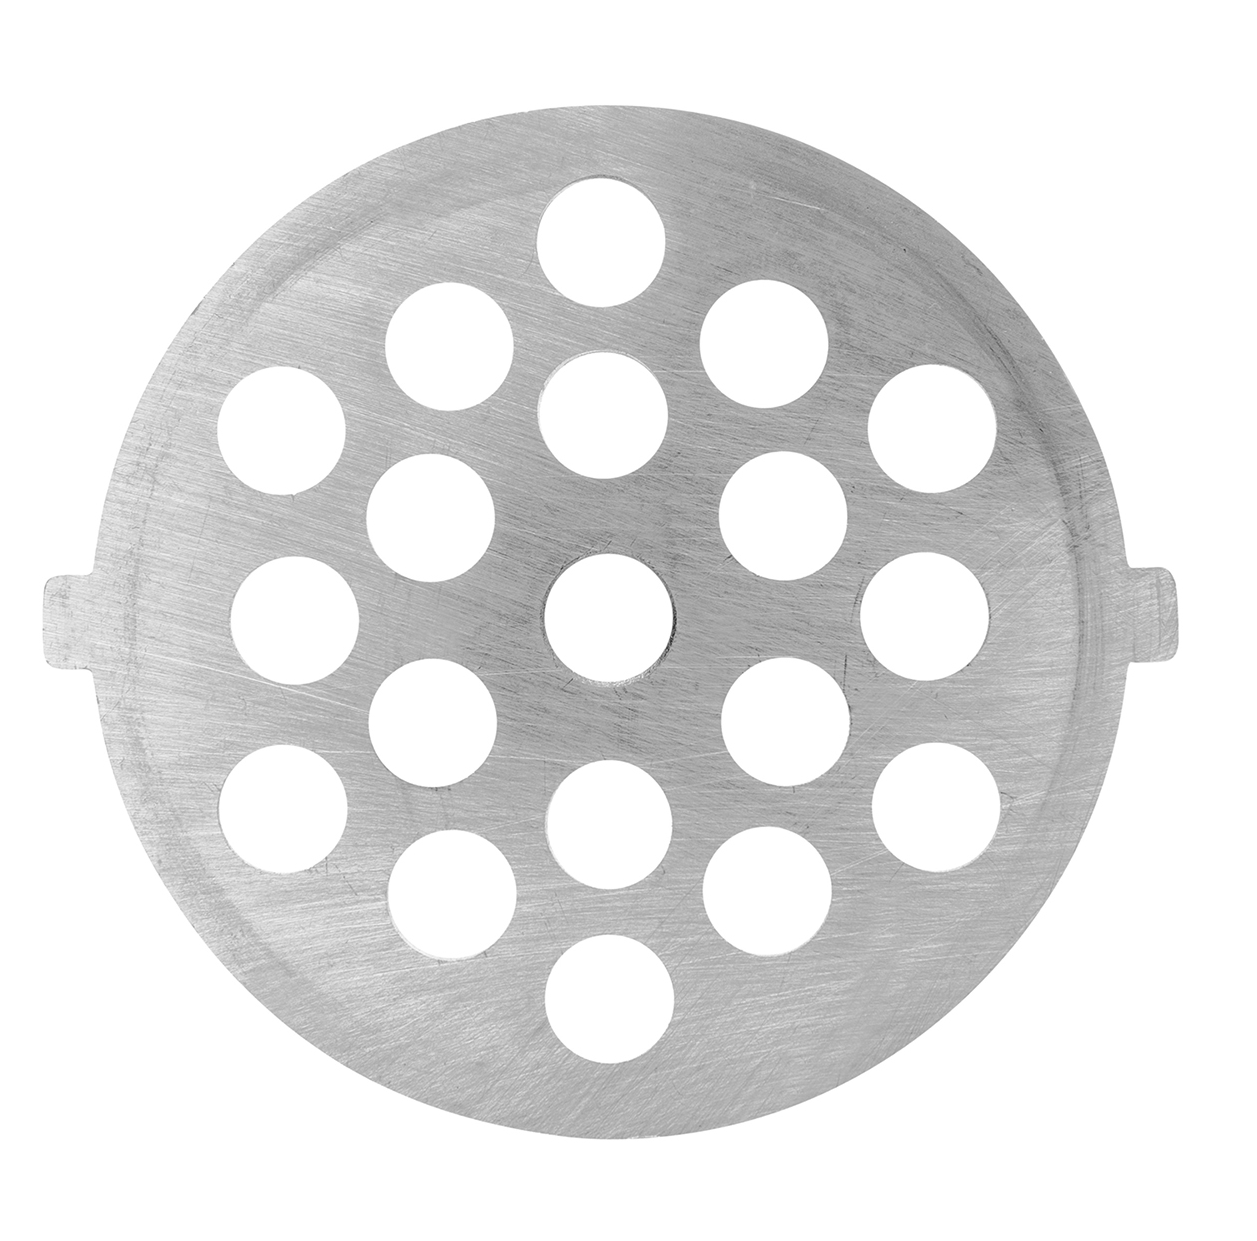 luvele-eu - 8mm Stainless Steel Cutting Plate for the Luvele Meat grinder